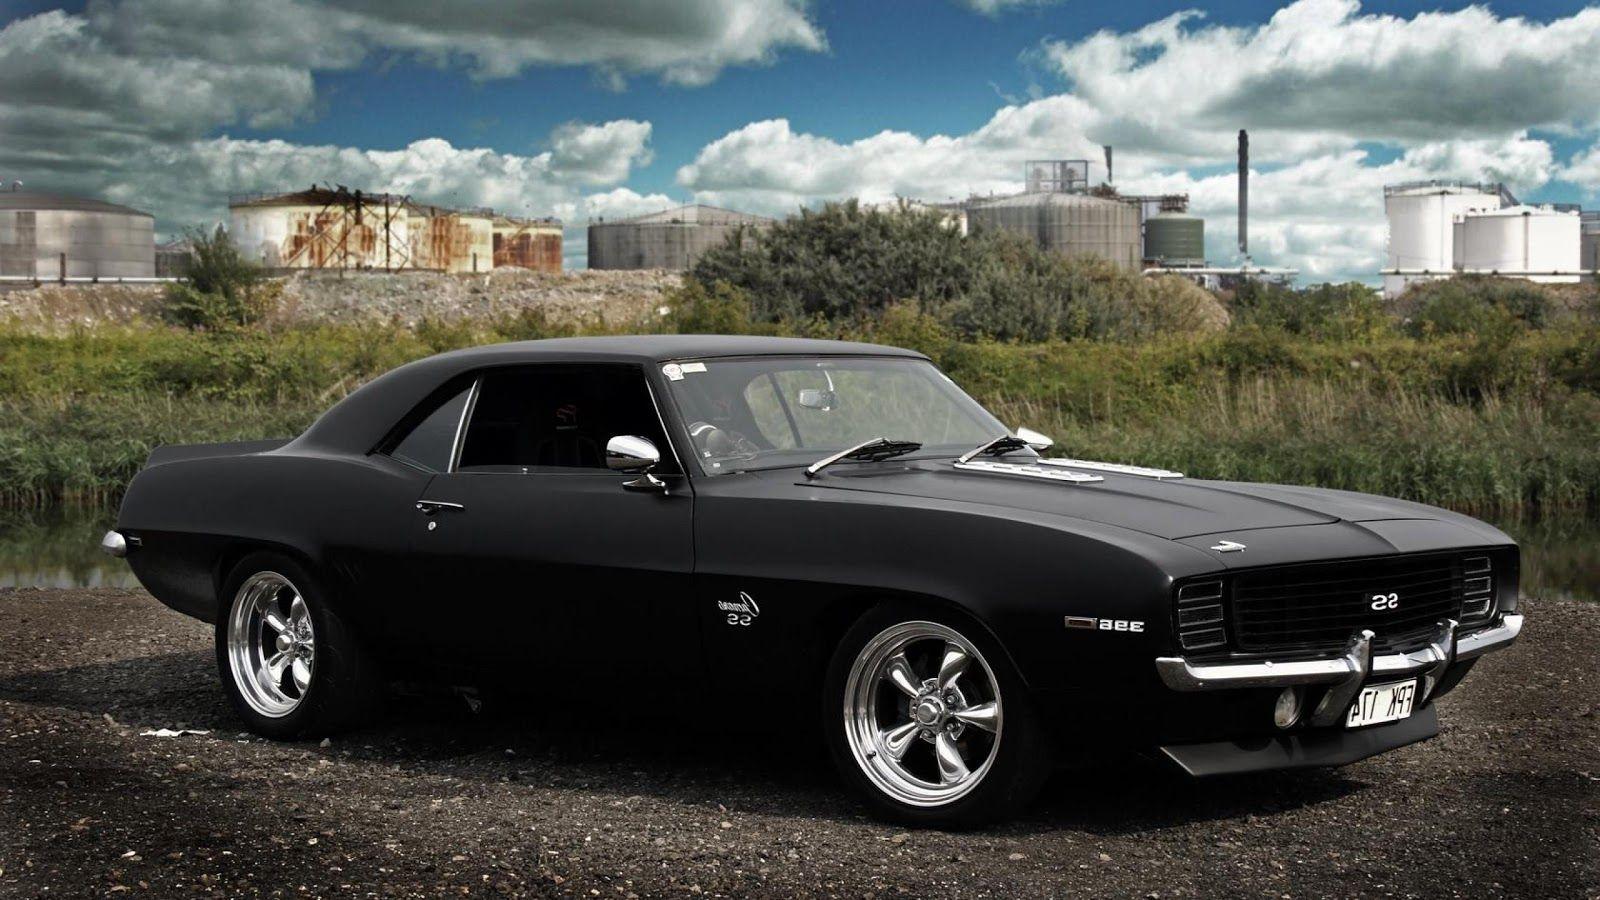 American Muscle Car Wallpaper Apps on Google Play